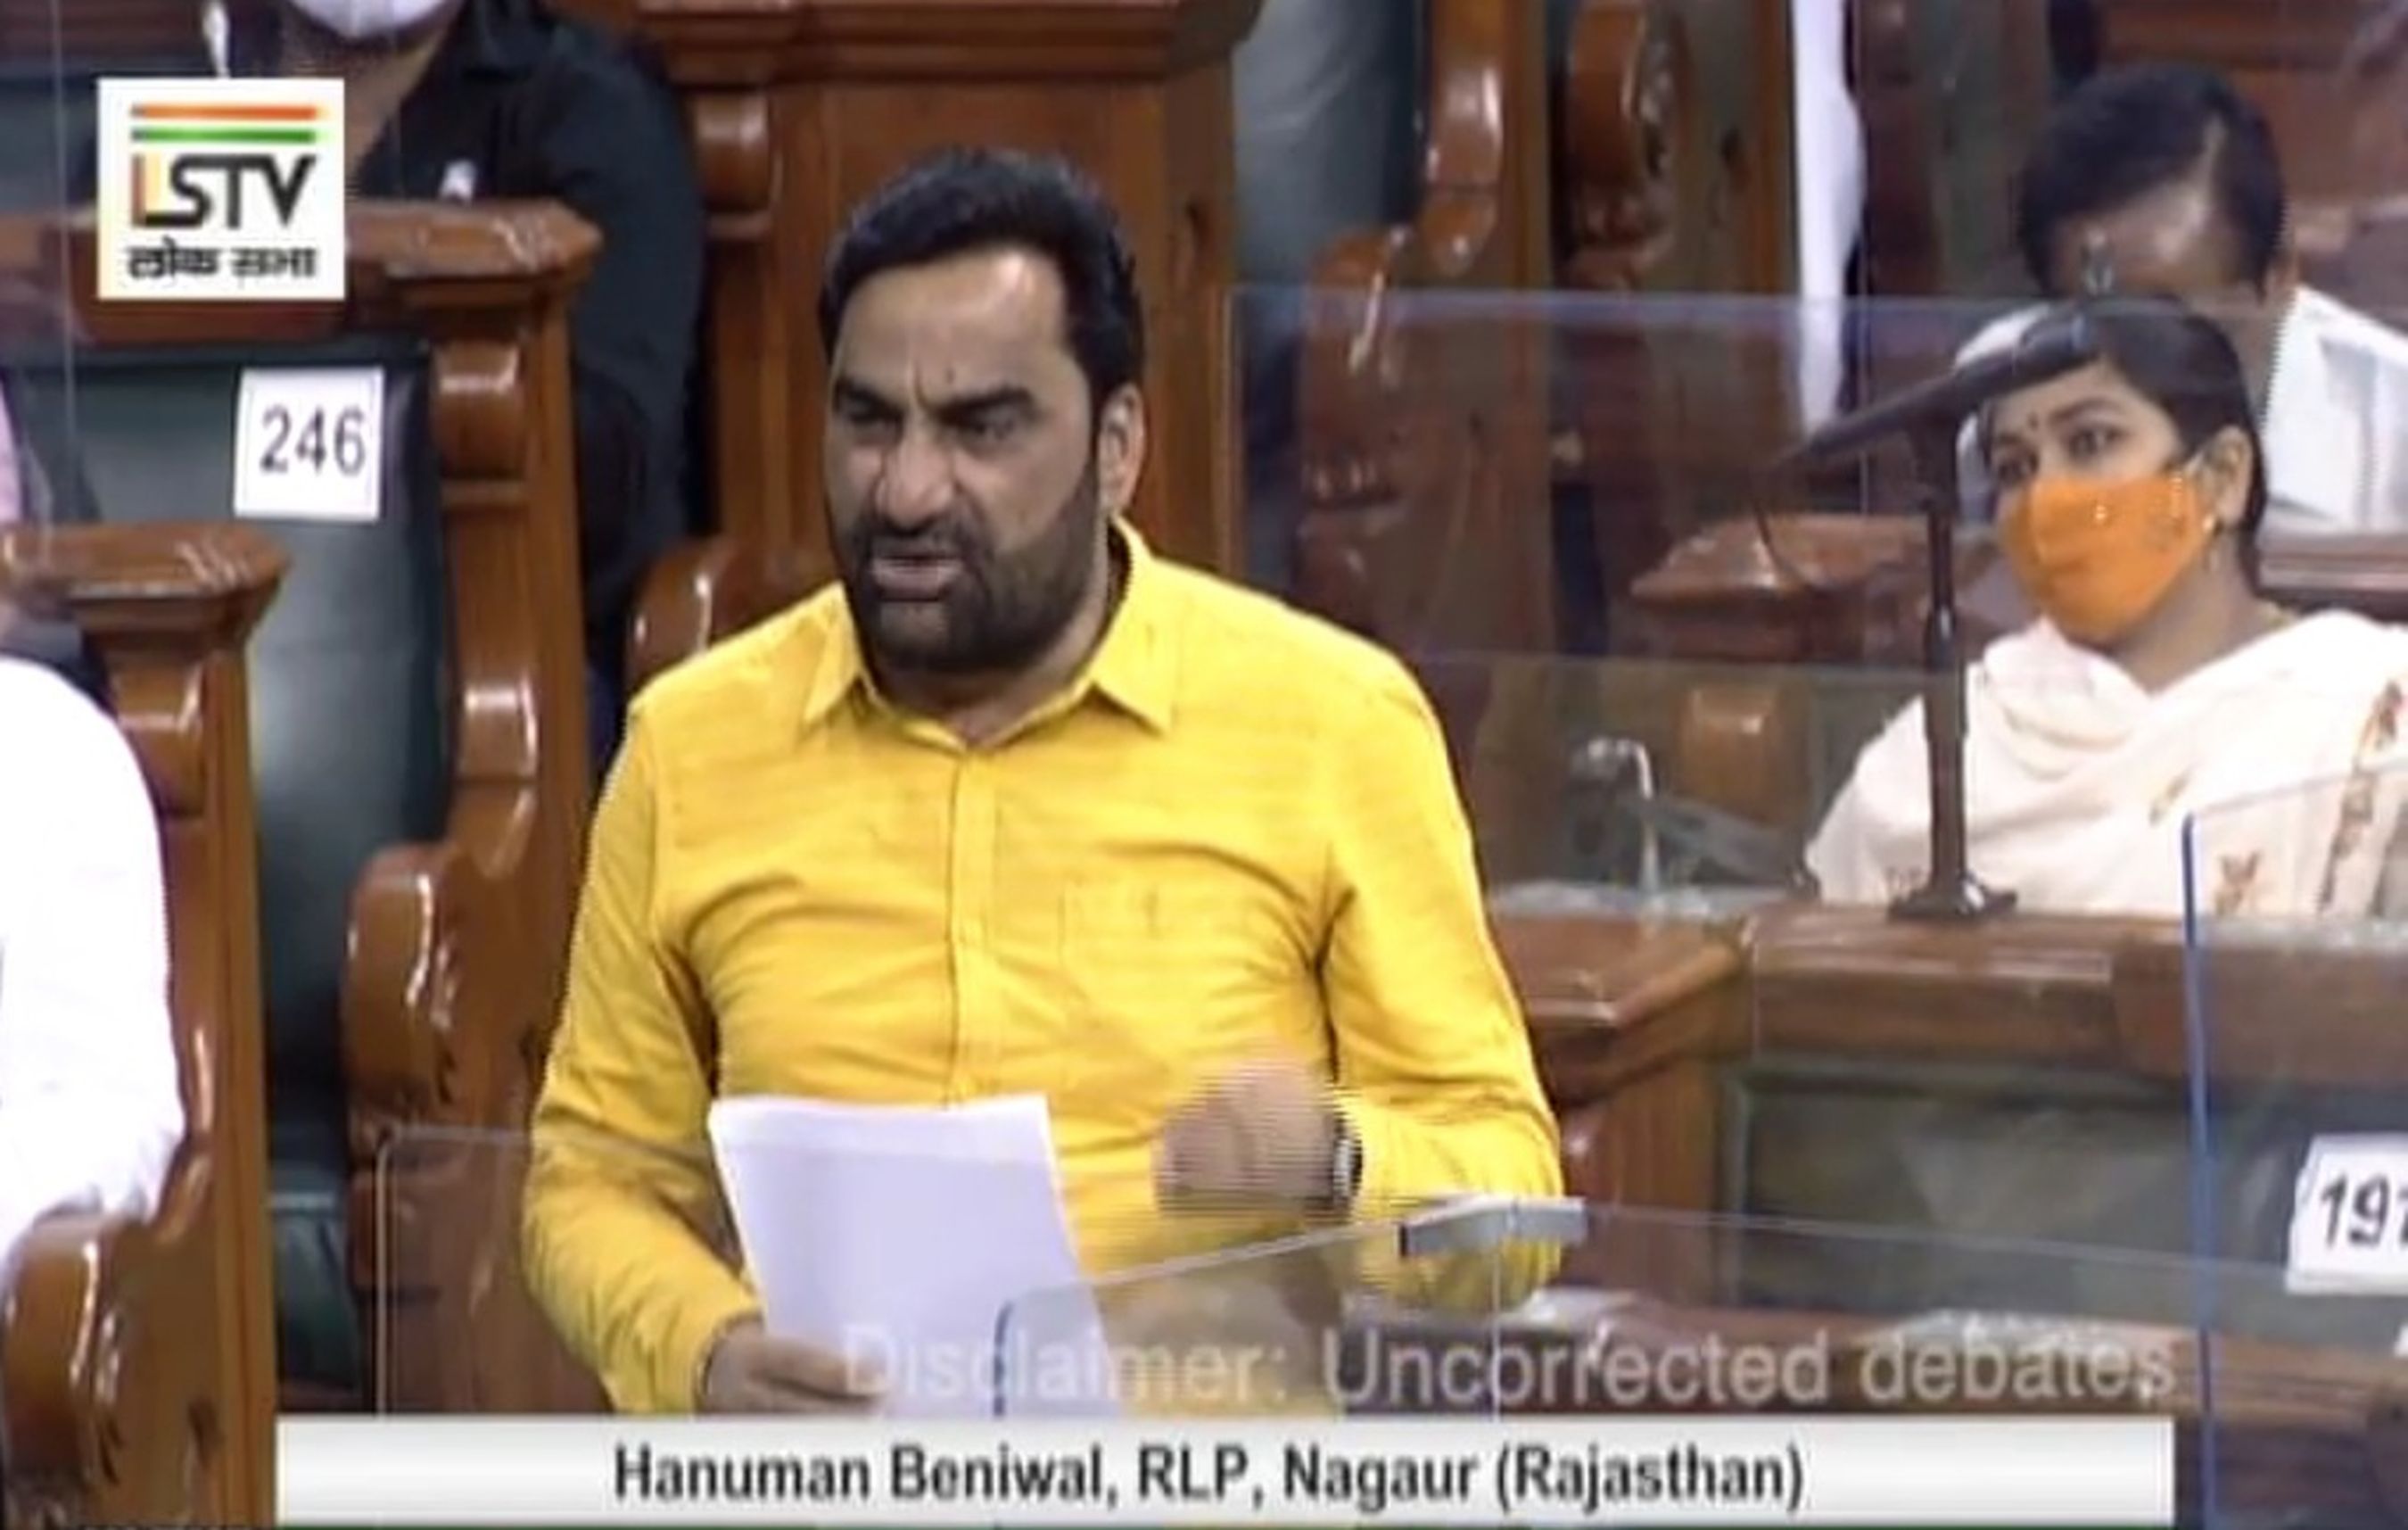 OBC class should get proper representation in the government sector - MP Beniwal